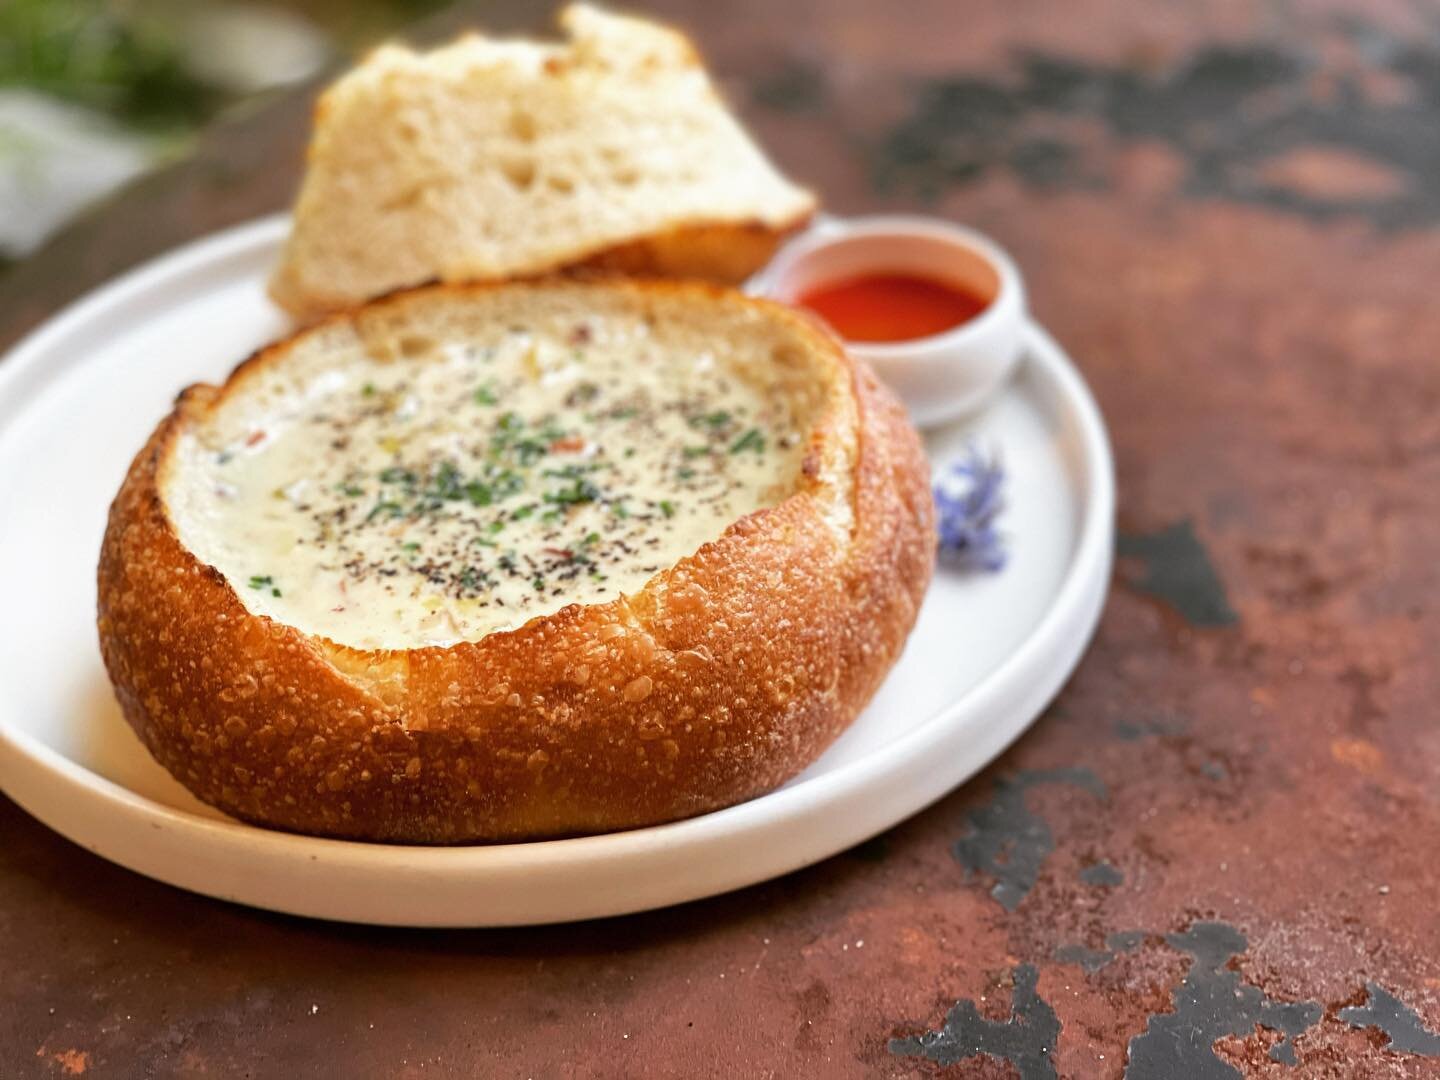 **NEW** Available starting today!
New England Style Clam Chowder in Bread Bowl 
16 oz. Clam Chowder with Miso + Littleneck Clams + Leeks + Bacon + Sourdough Bread Bowl